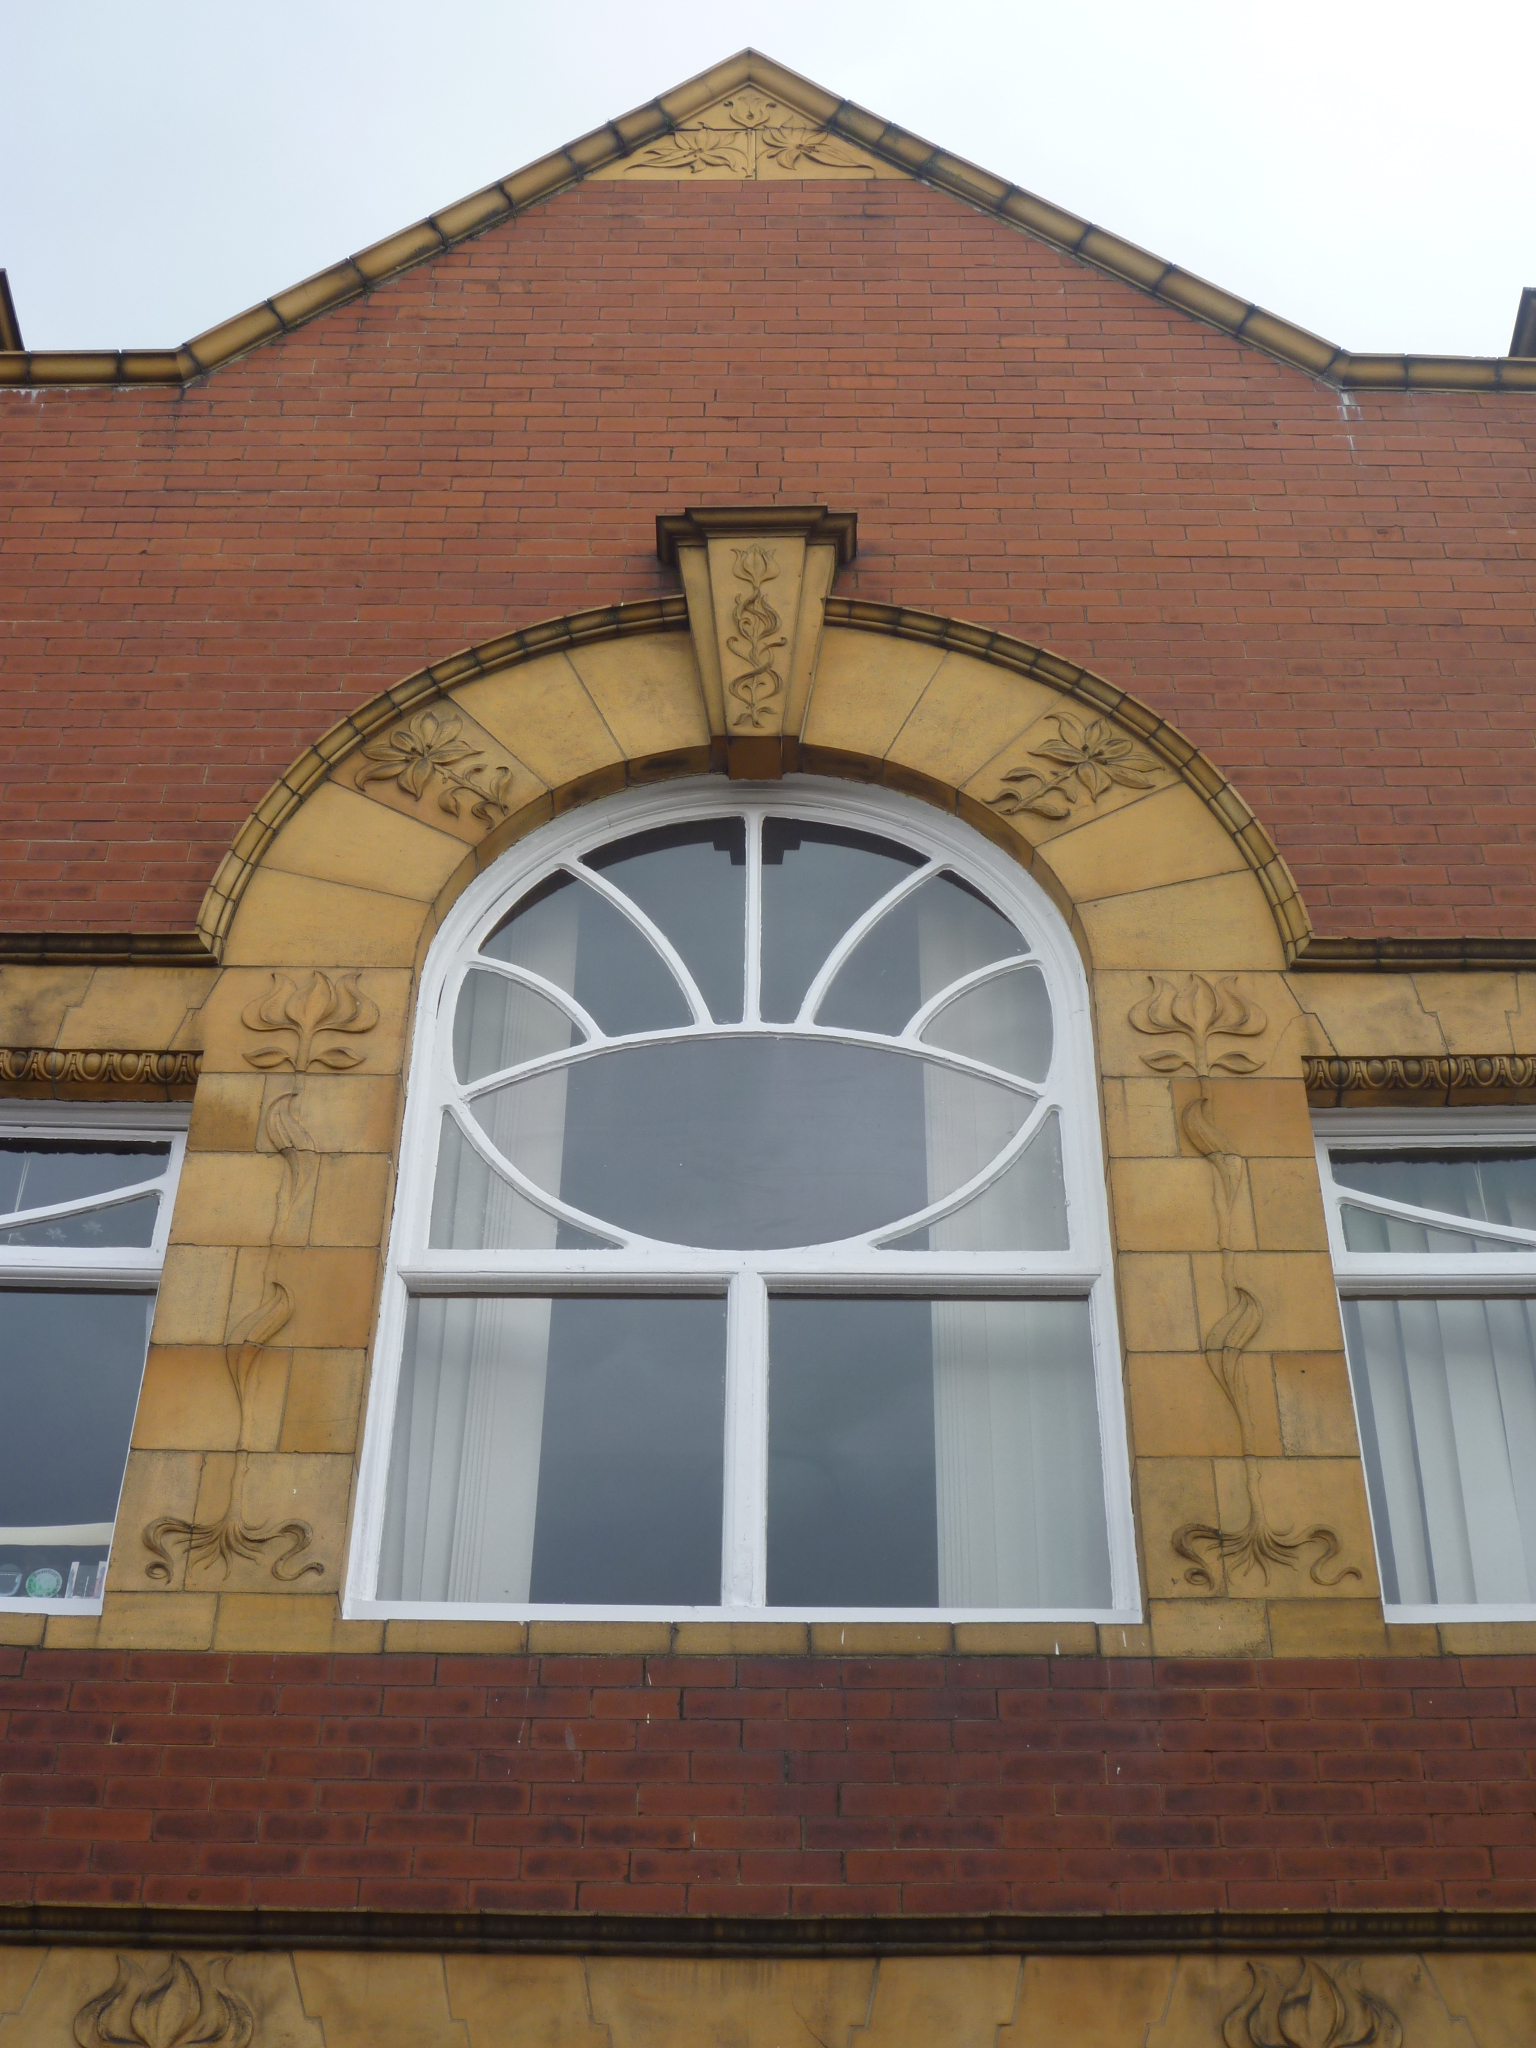 two windows on a brick building that have decorative designs